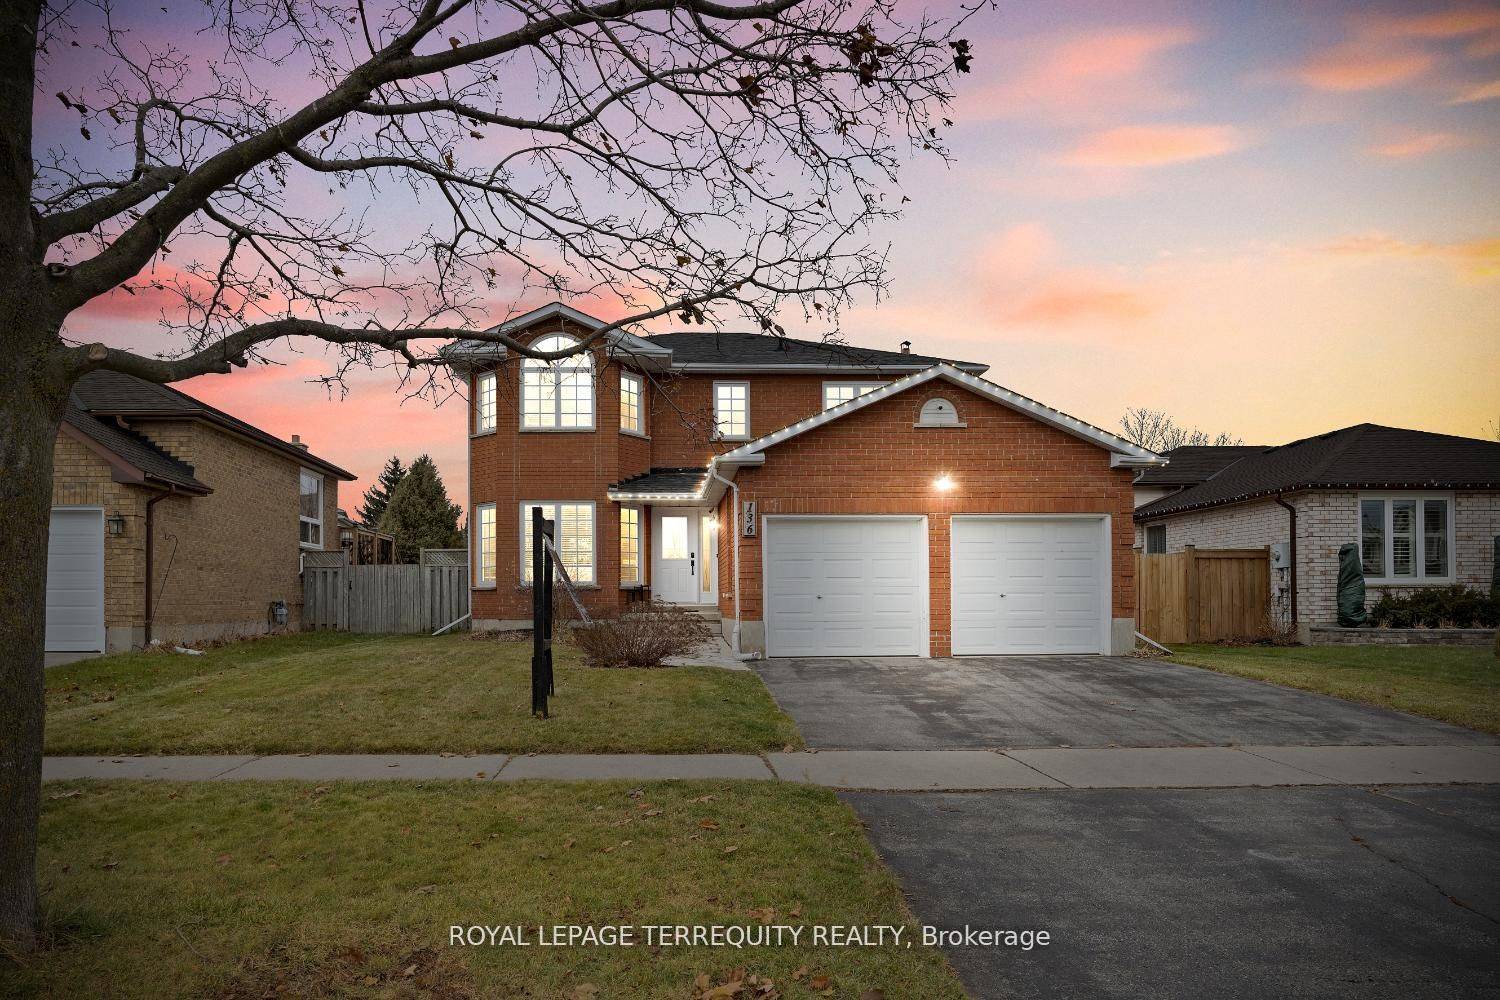 Introducing A Beautiful 2 Storey, 4 Bdrm Home Nestled In A Family Friendly Location Of N.